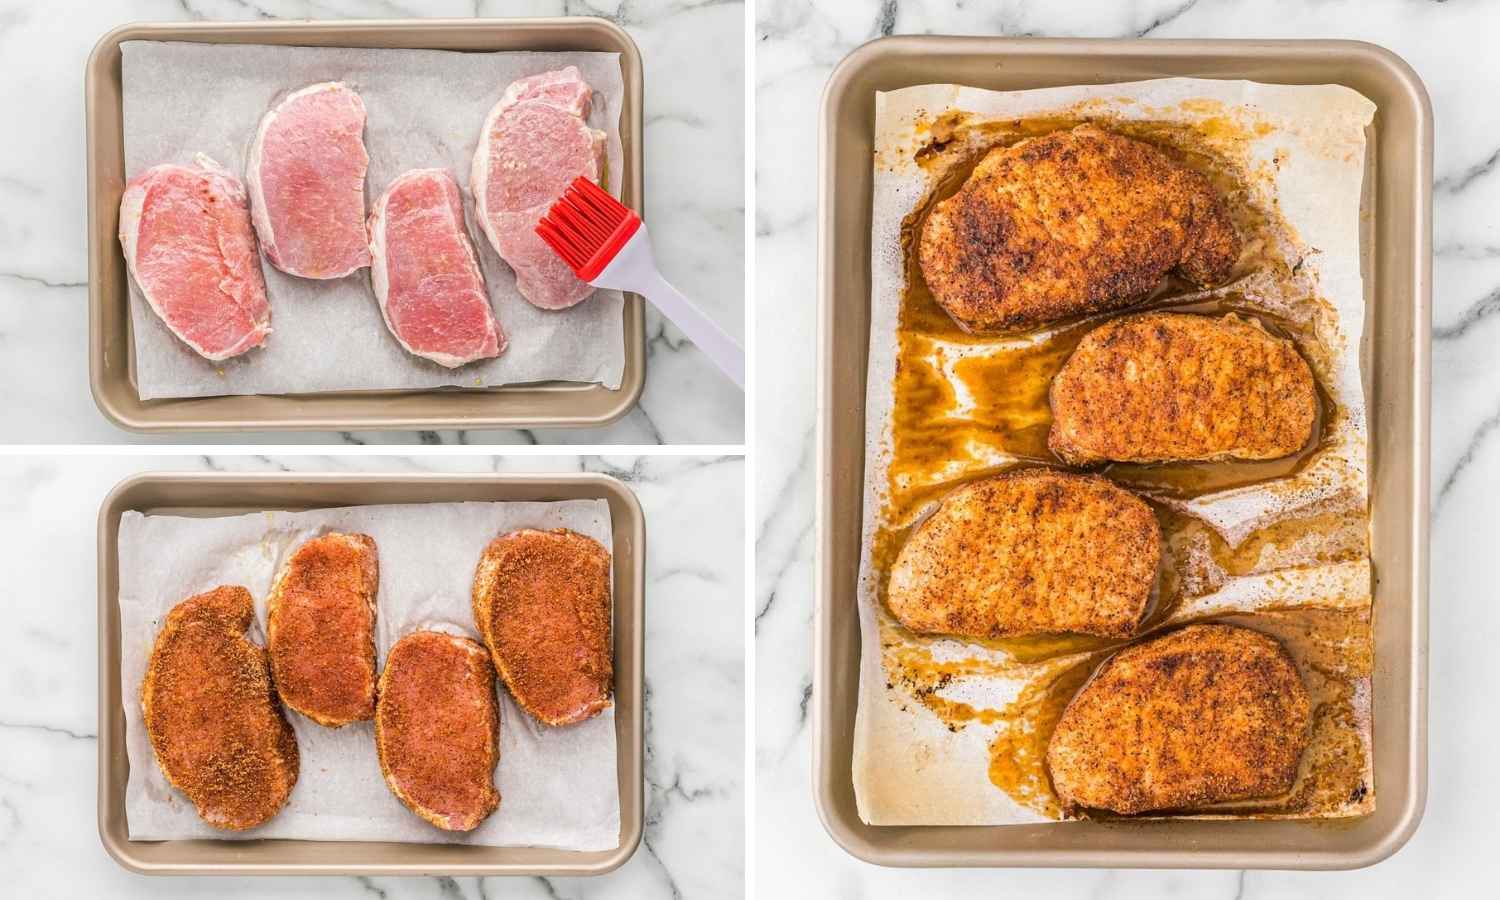 Collage of 3 images showing how to season and bake pork chops